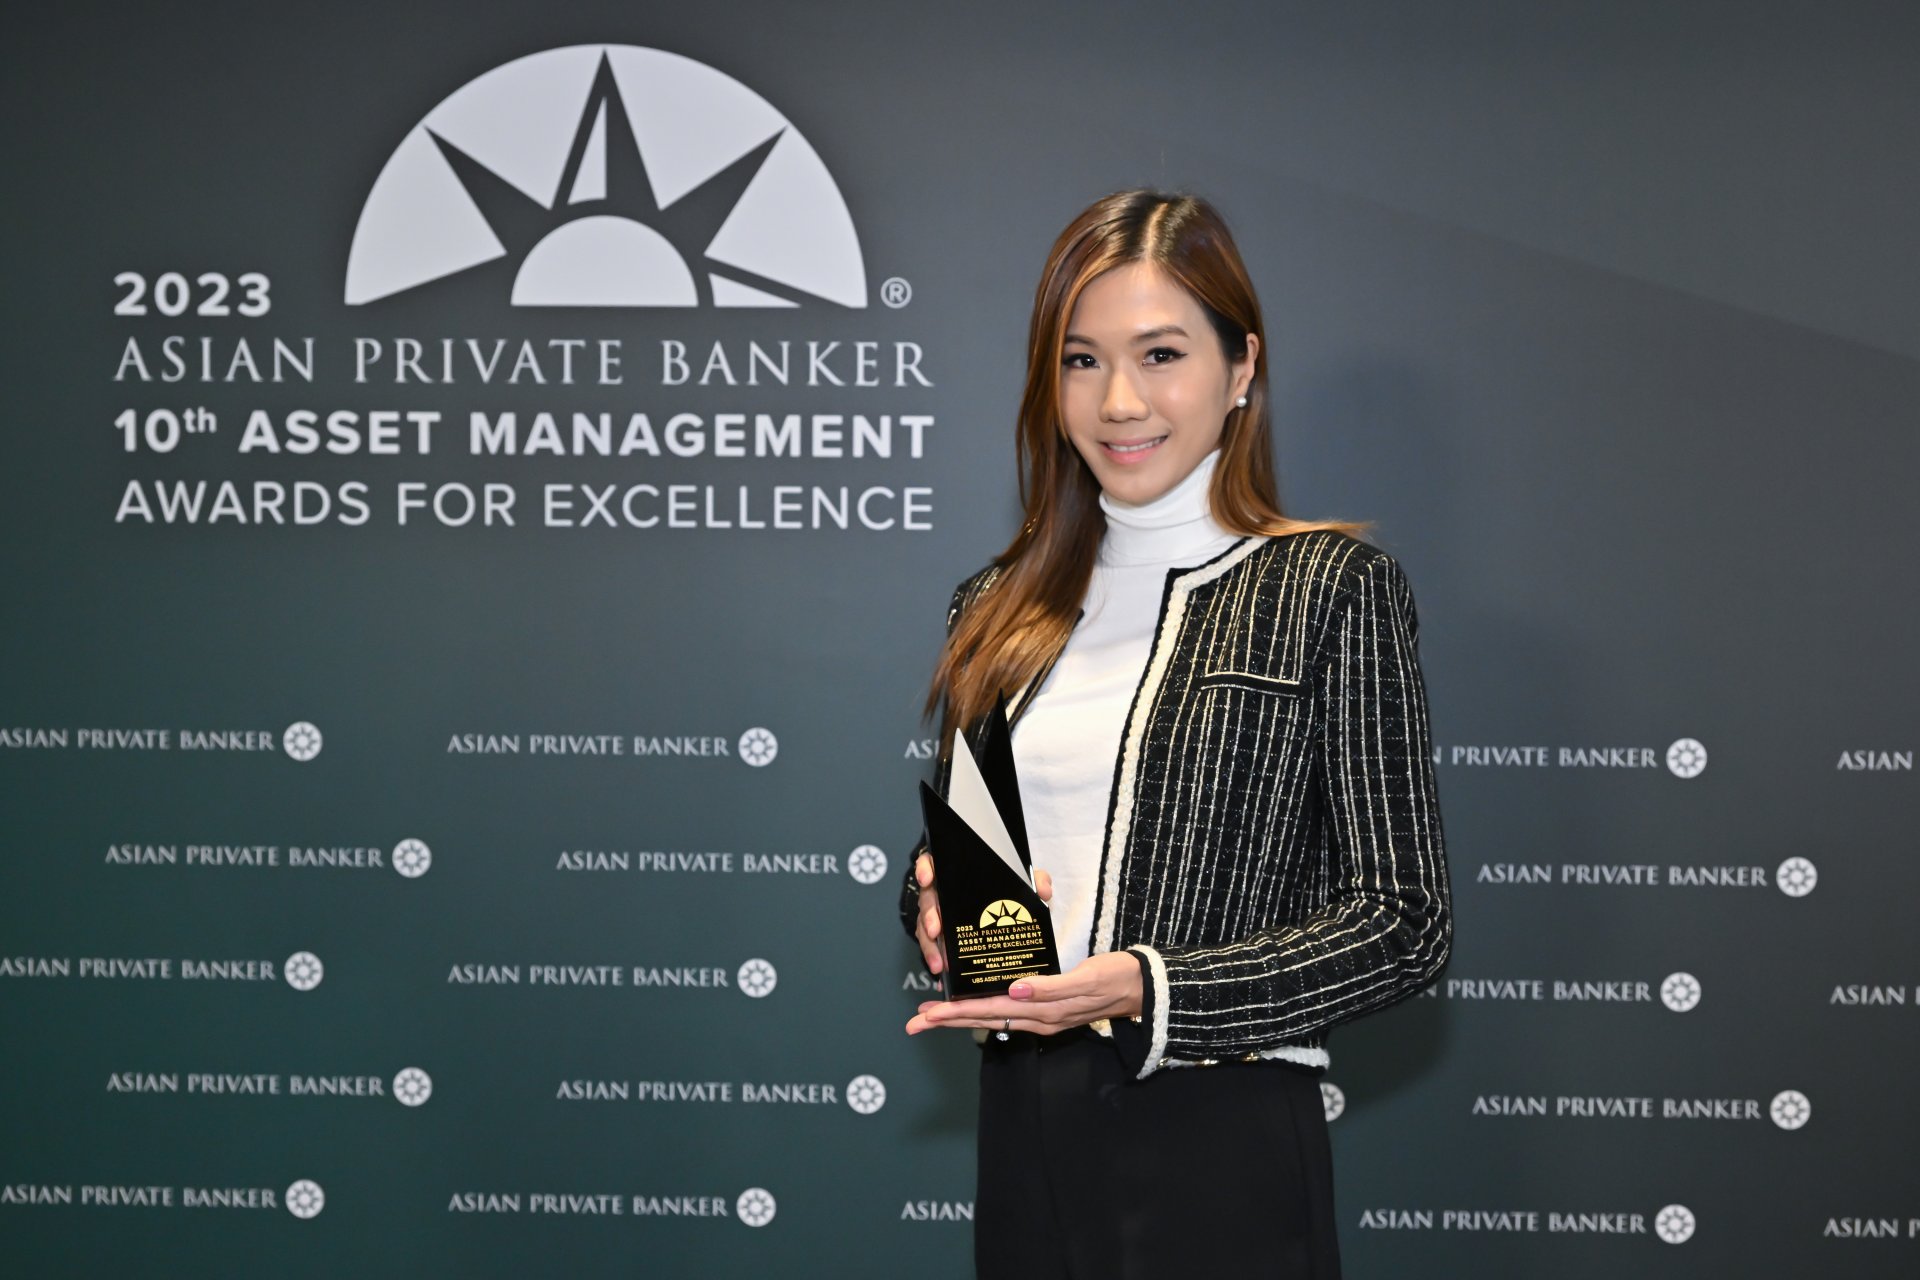 Accepting Best Fund Provider - Real Assets at Asian Private Banker’s 10th Asset Management Awards for Excellence is Joyce Ho